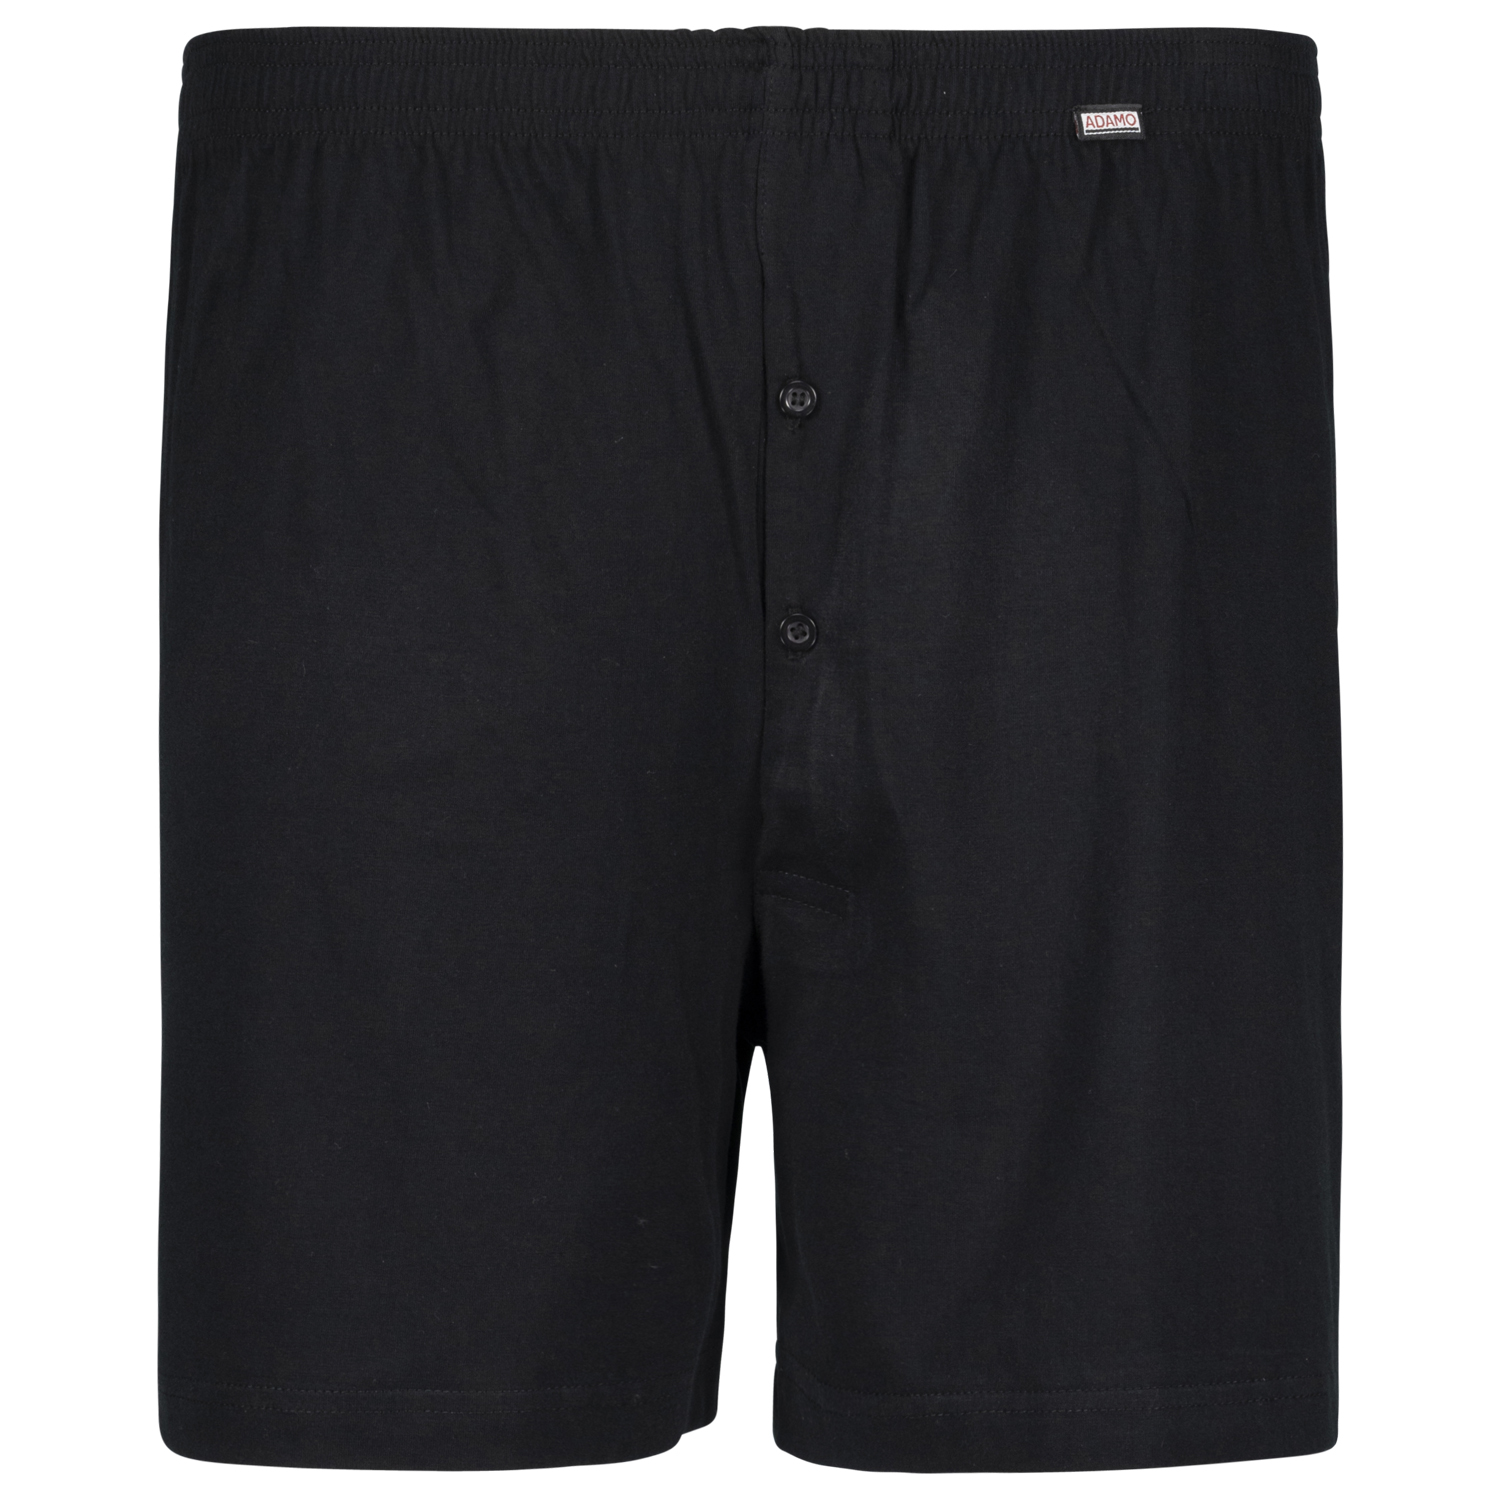 Black triple pack "JAMES" boxershorts by ADAMO in large sizes up to 20